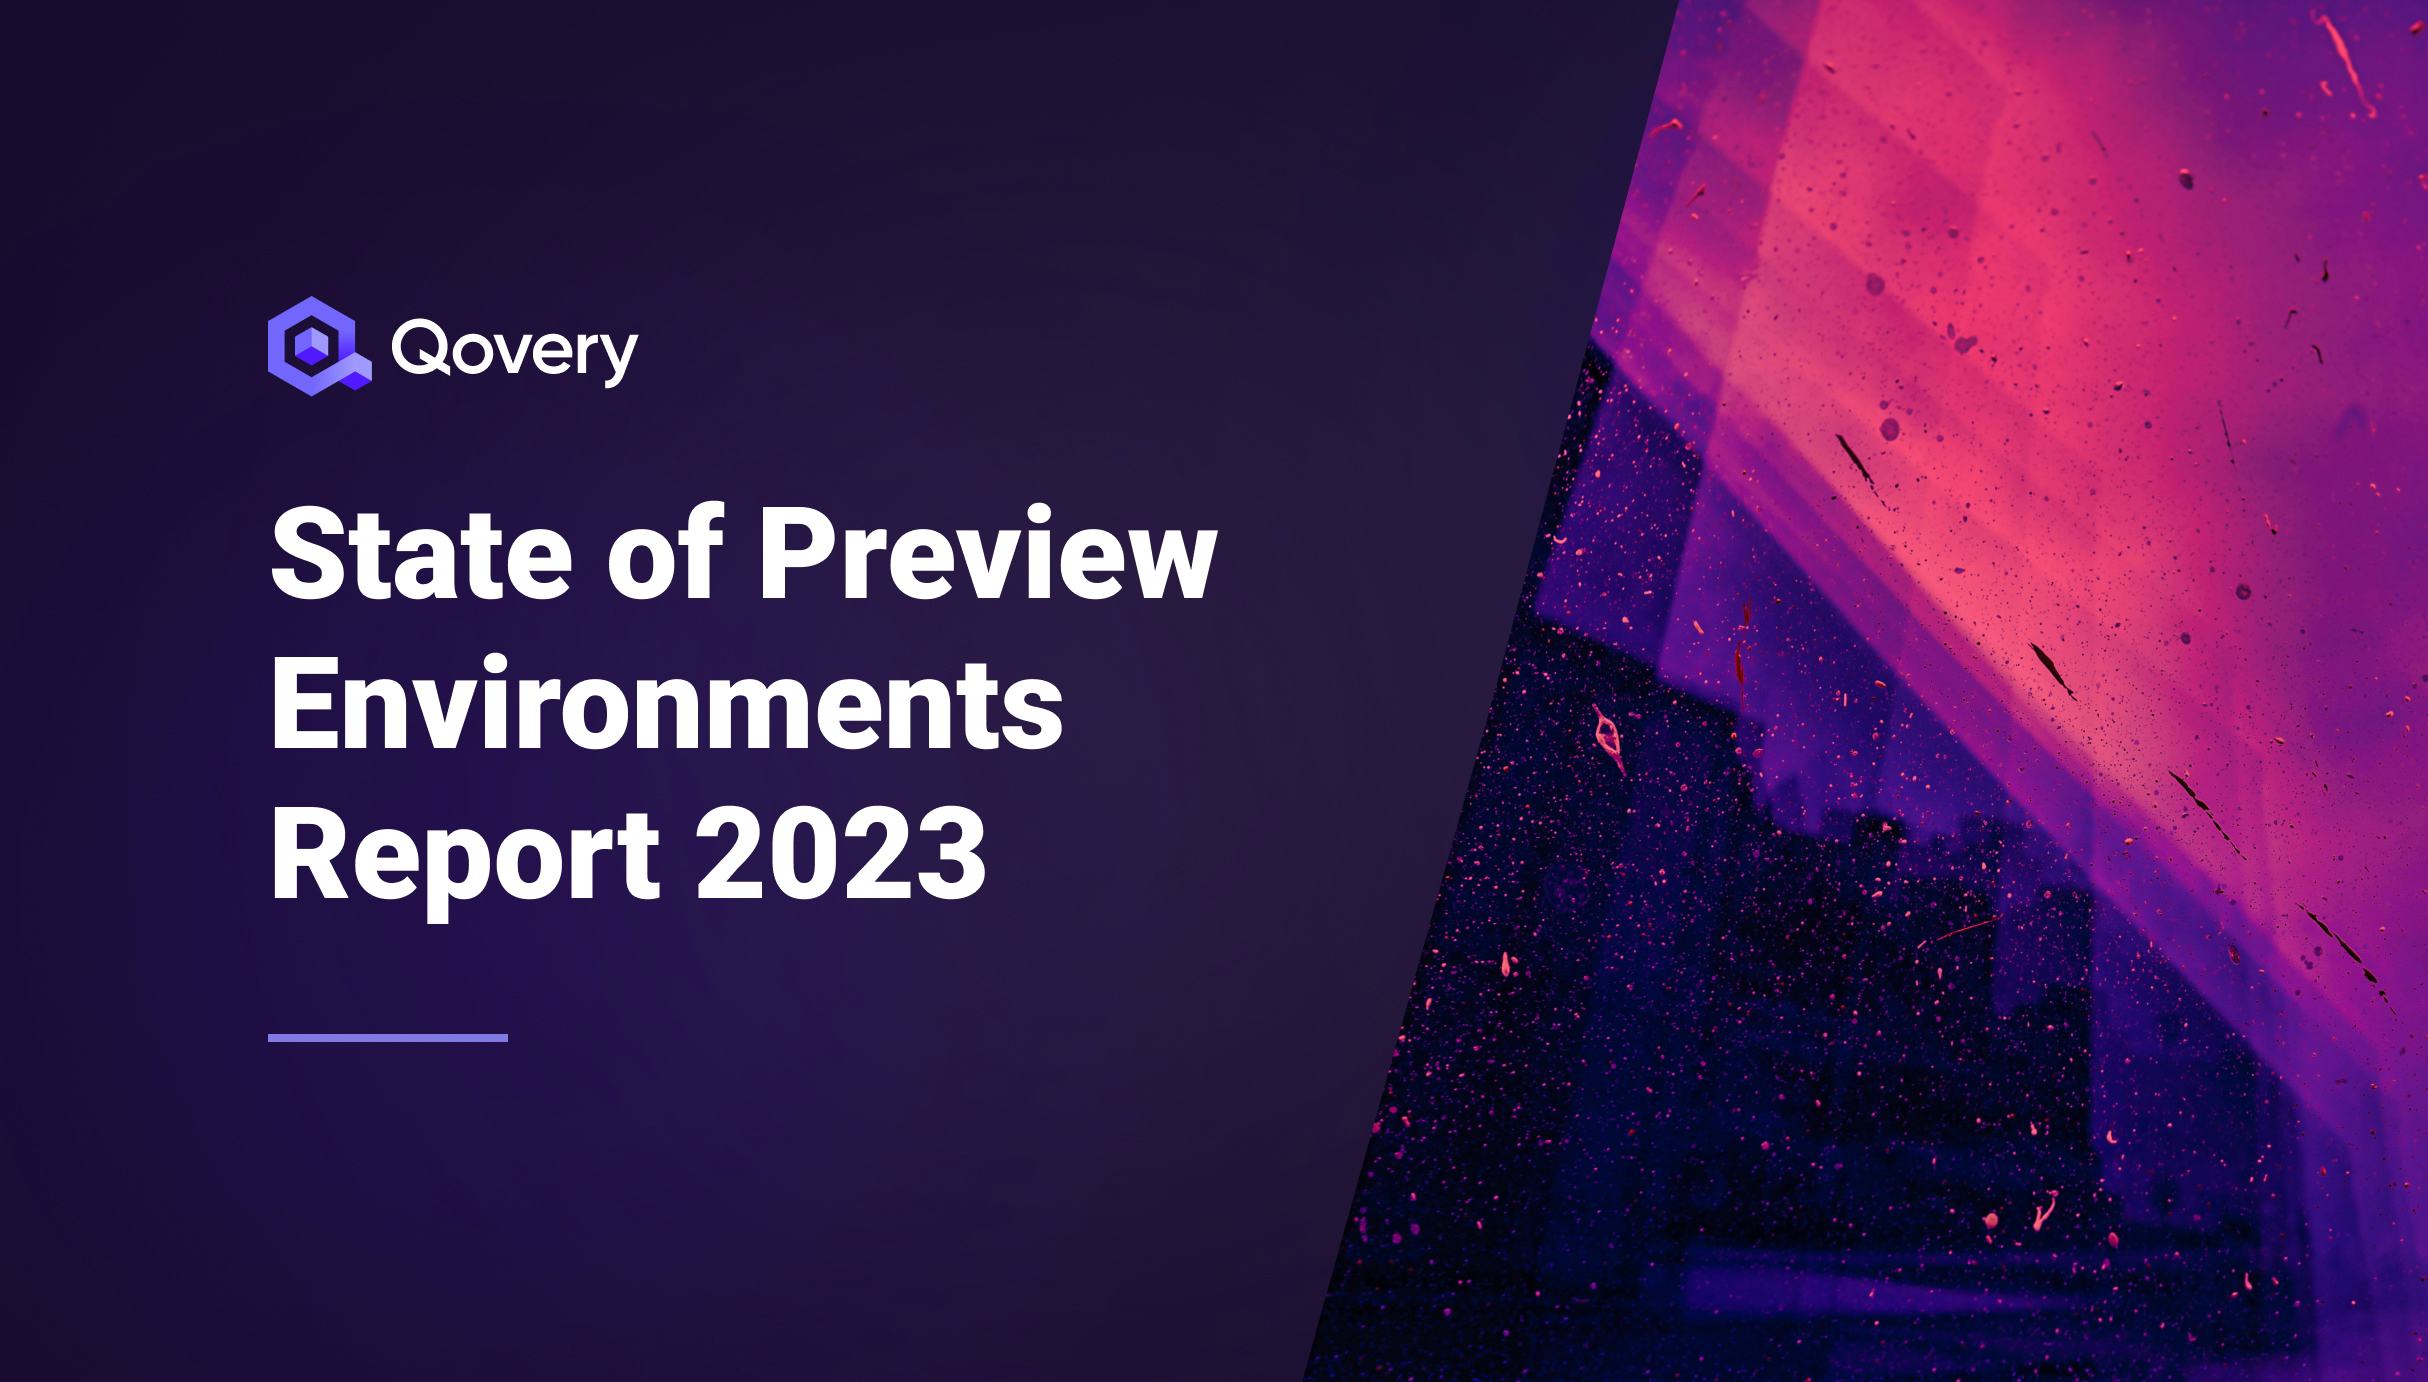 State of Preview Environments Report 2023 - Qovery